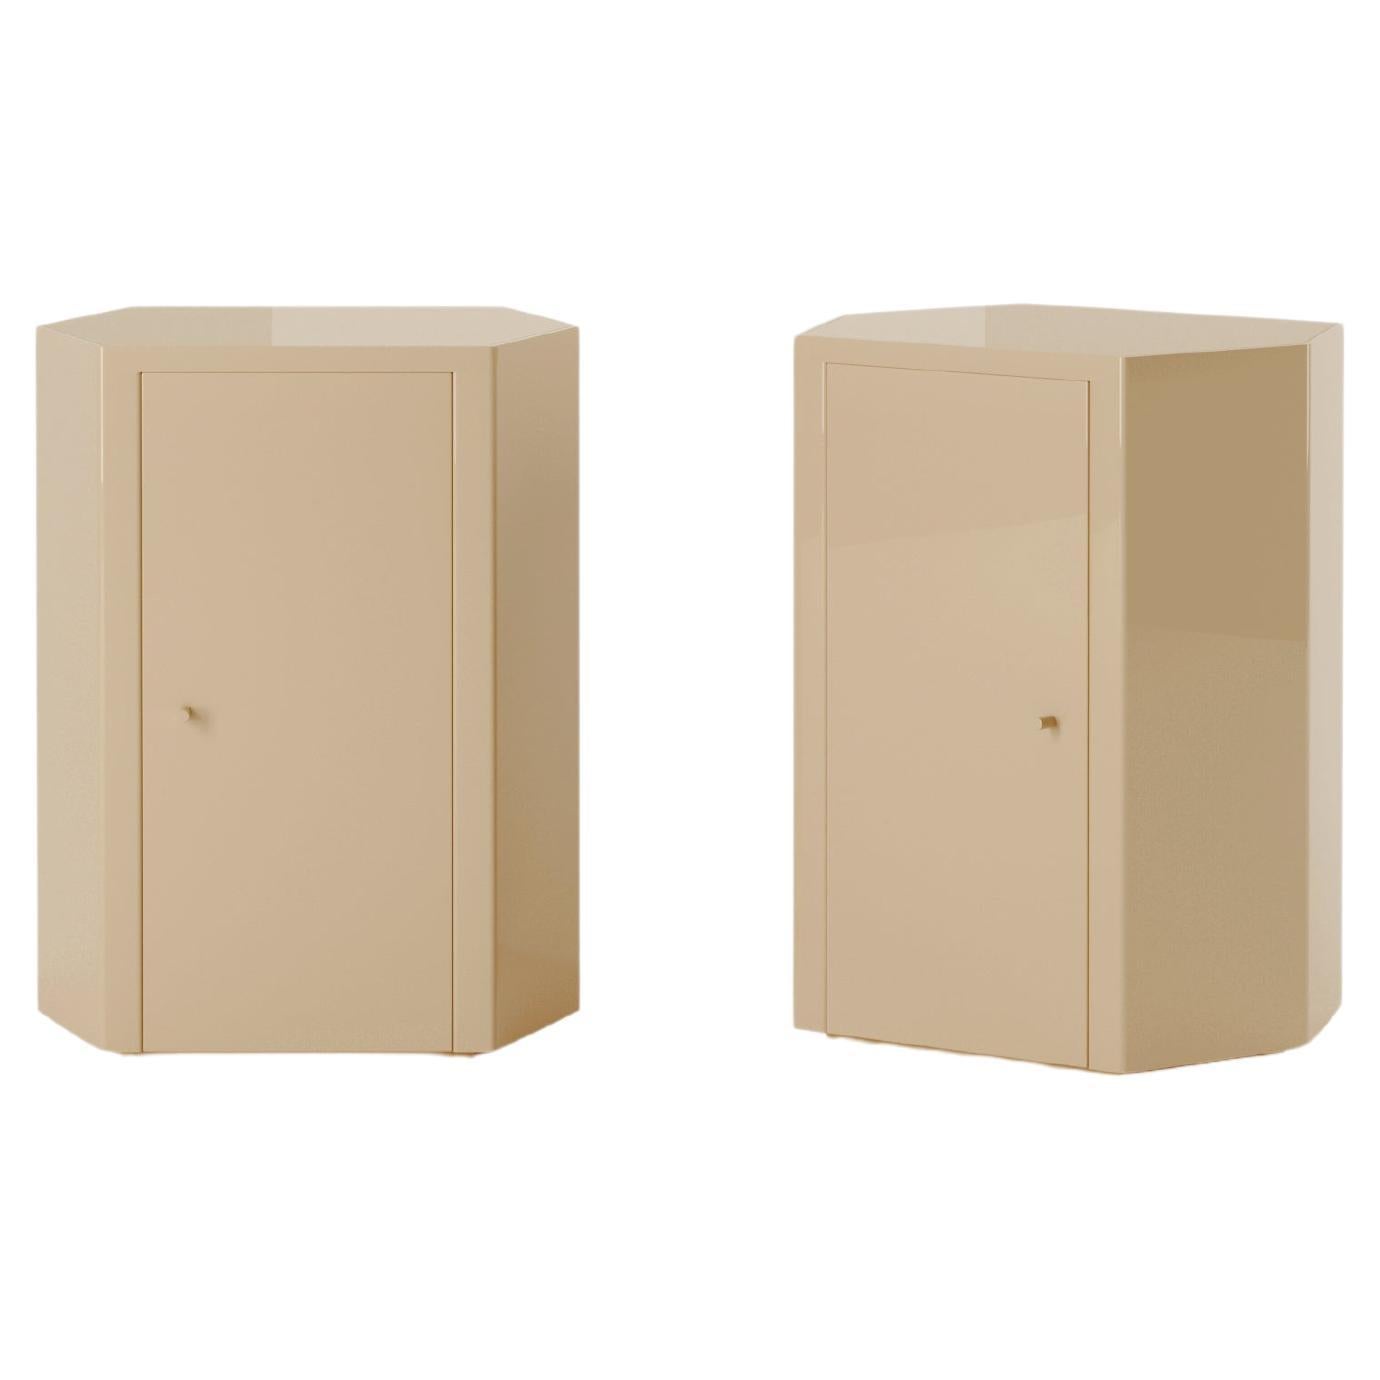 Pair of Park Night Stands in Sand Beige Lacquer by Yaniv Chen for Lemon For Sale